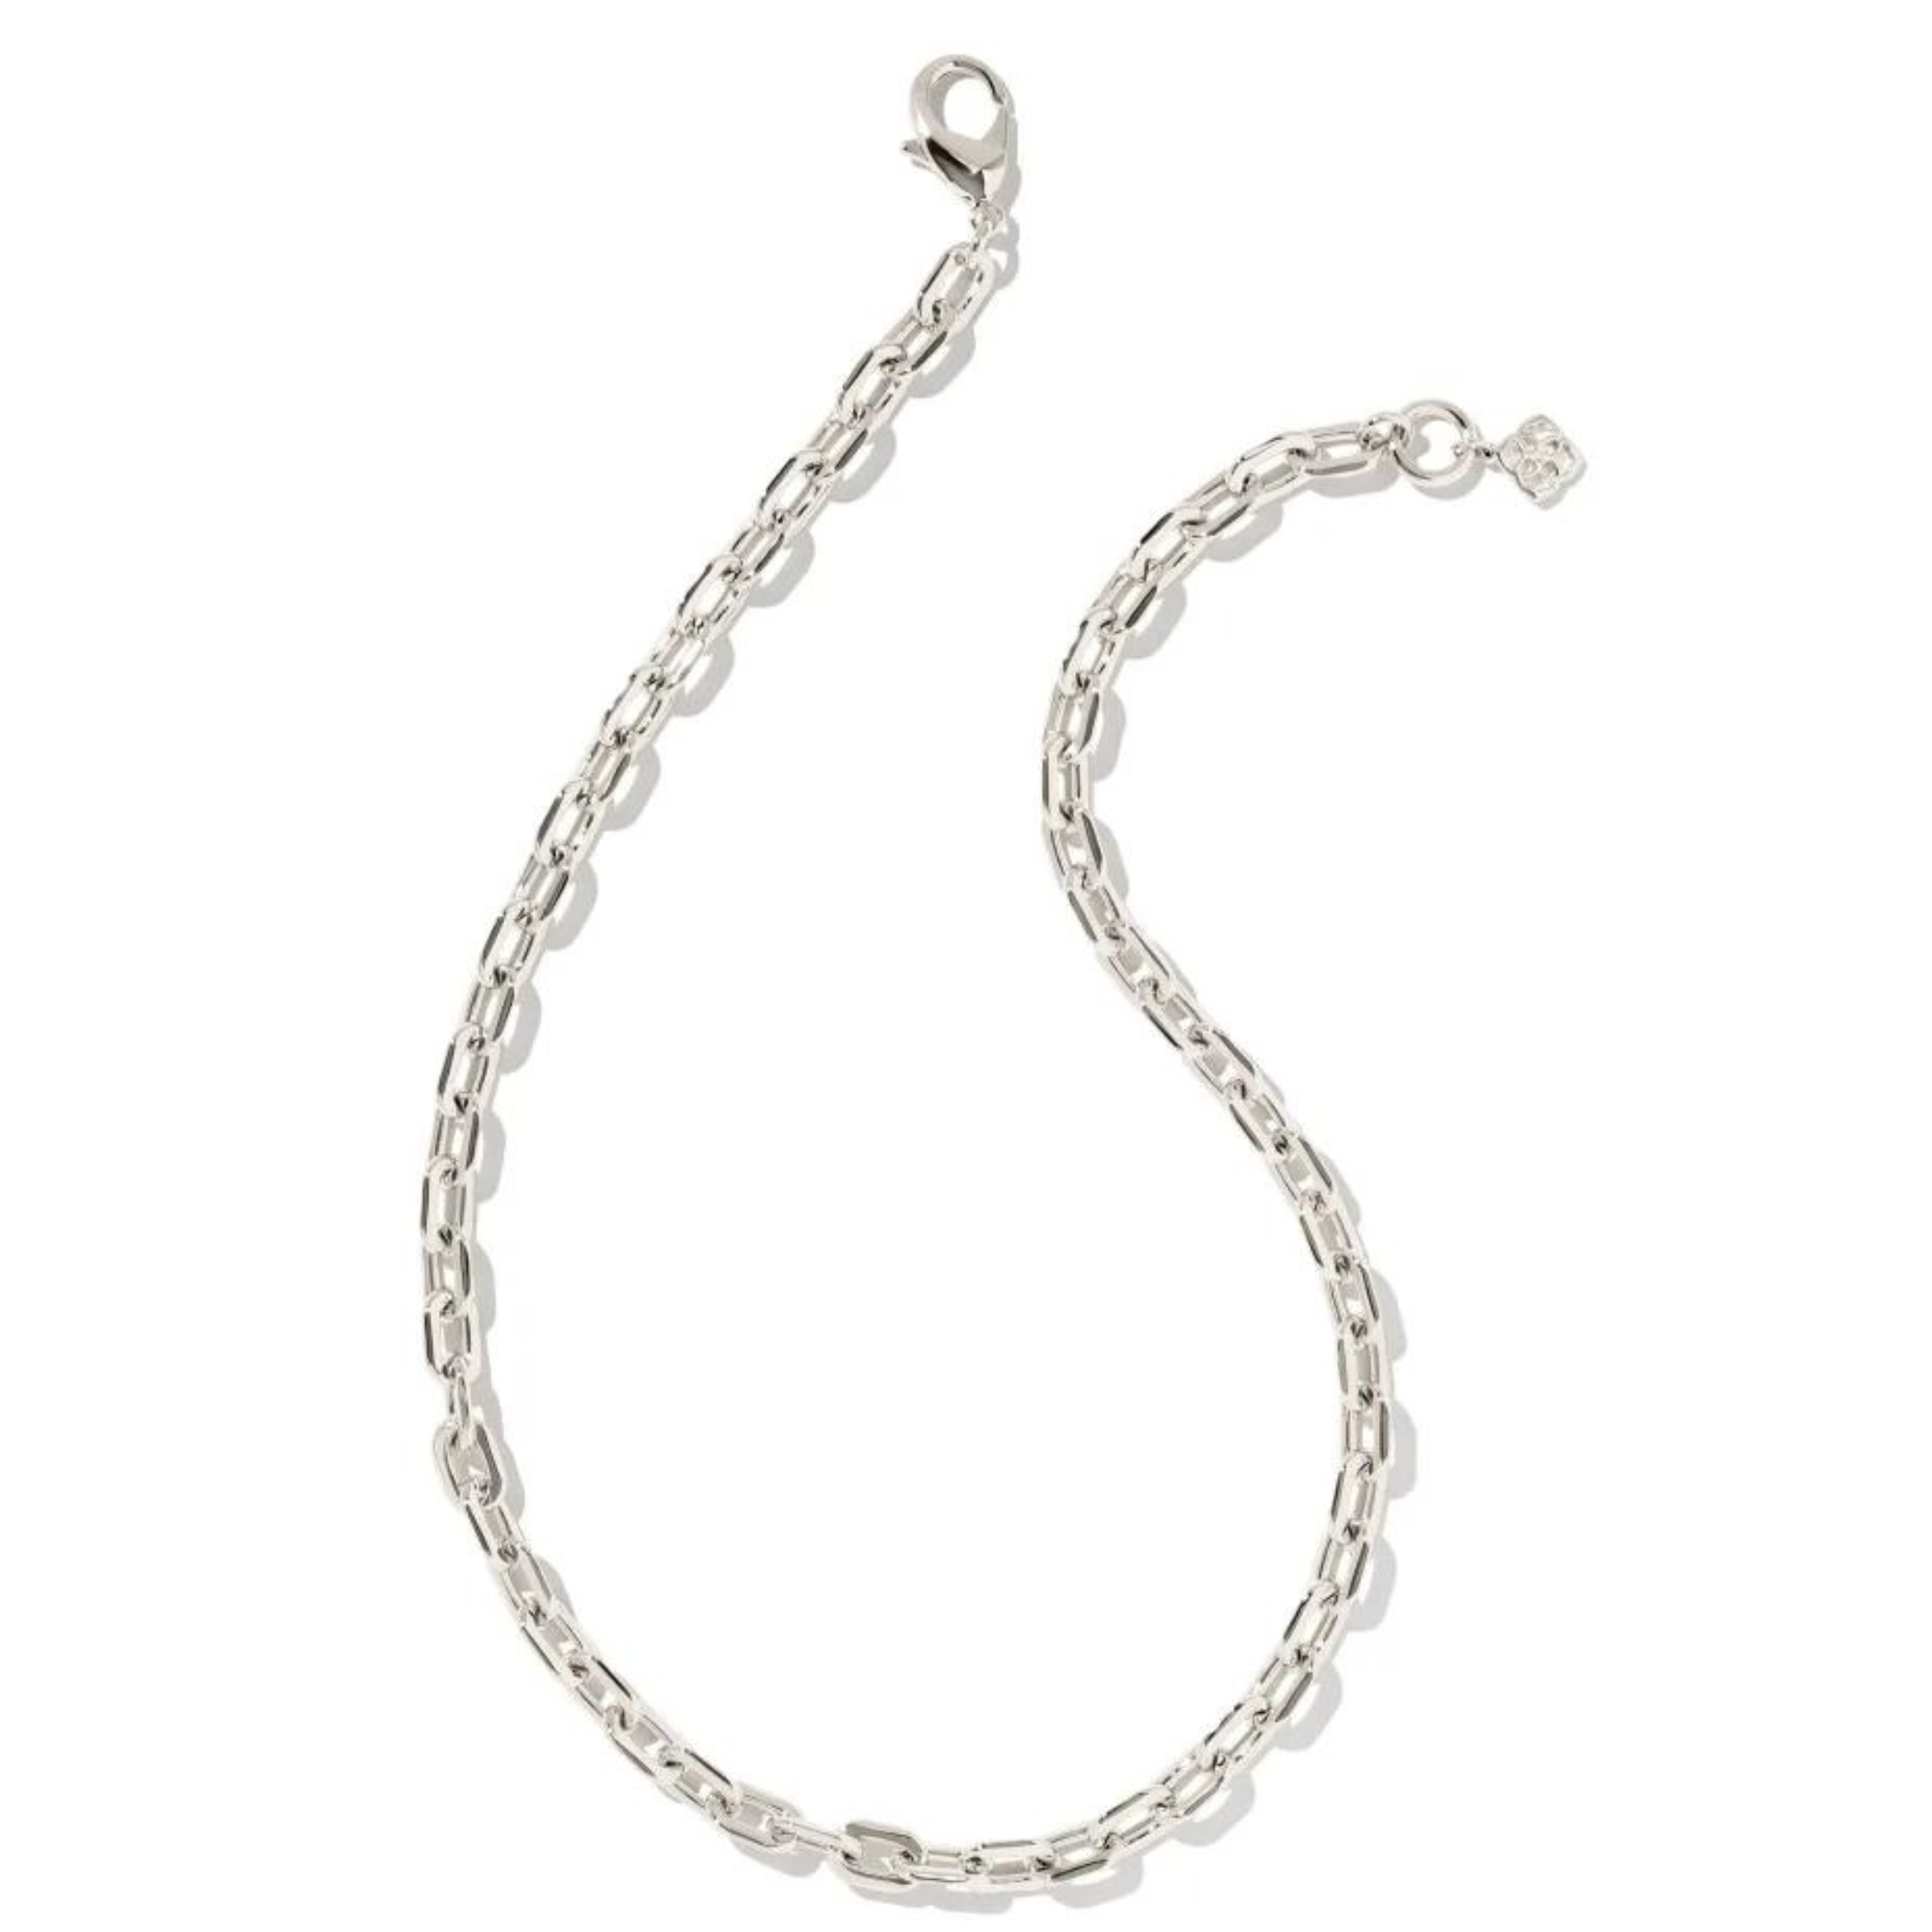 Silver chain necklace pictured on a white background. 